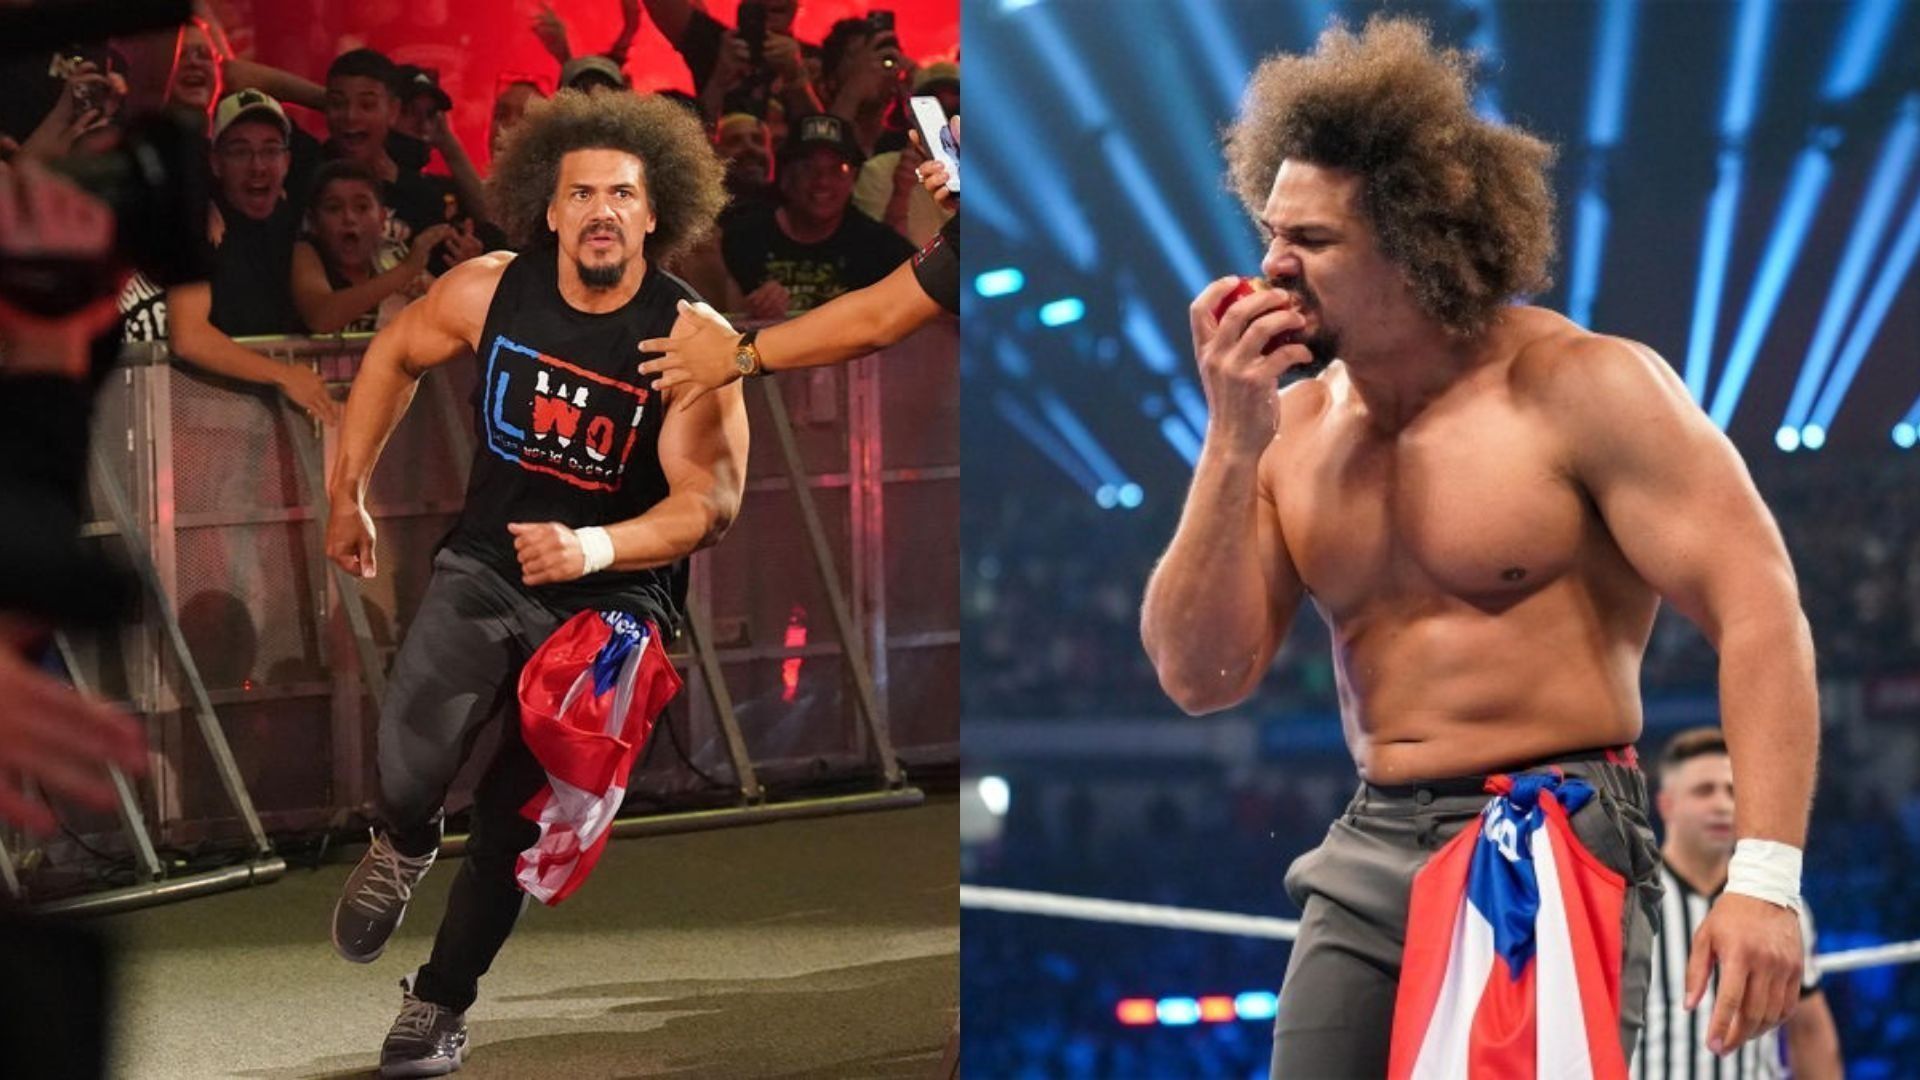 Carlito could certainly make a full-time comeback to WWE